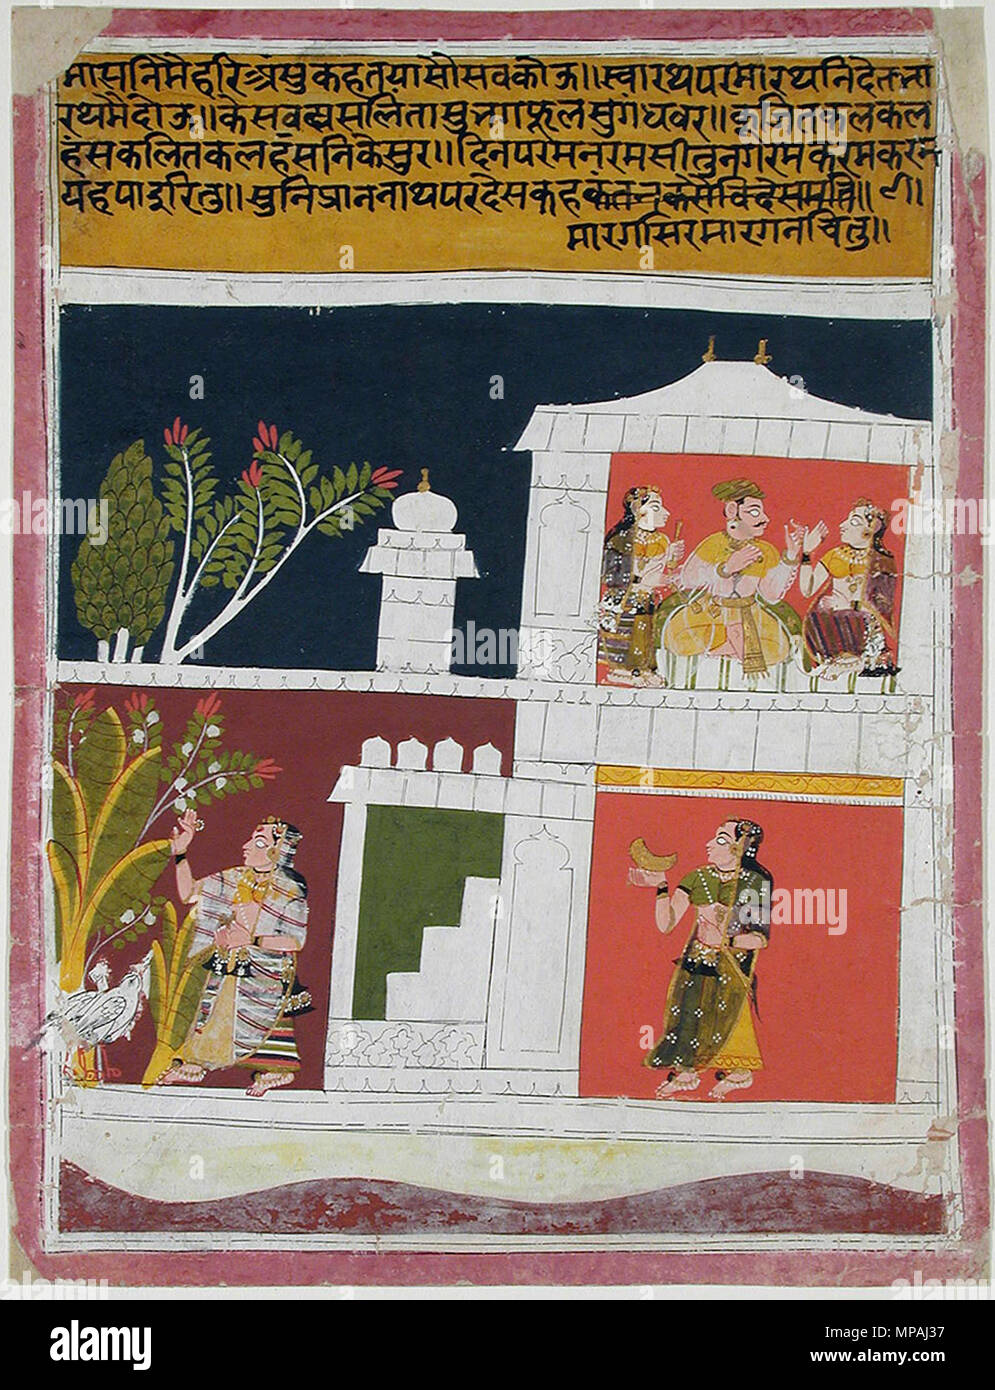 . English: Series Title: Connoisseur's Delight Suite Name: Rasikapriya Creation Date: ca. 1655 Display Dimensions: 9 17/32 in. x 7 1/4 in. (24.2 cm x 18.4 cm) Credit Line: Edwin Binney 3rd Collection Accession Number: 1990.958 Collection: <a href='http://www.sdmart.org/art/our-collection/asian-art' rel='nofollow'>The San Diego Museum of Art</a> . 15 October 2001, 09:53:53. English: thesandiegomuseumofartcollection 1172 The distraught nayika (6125116600) Stock Photo